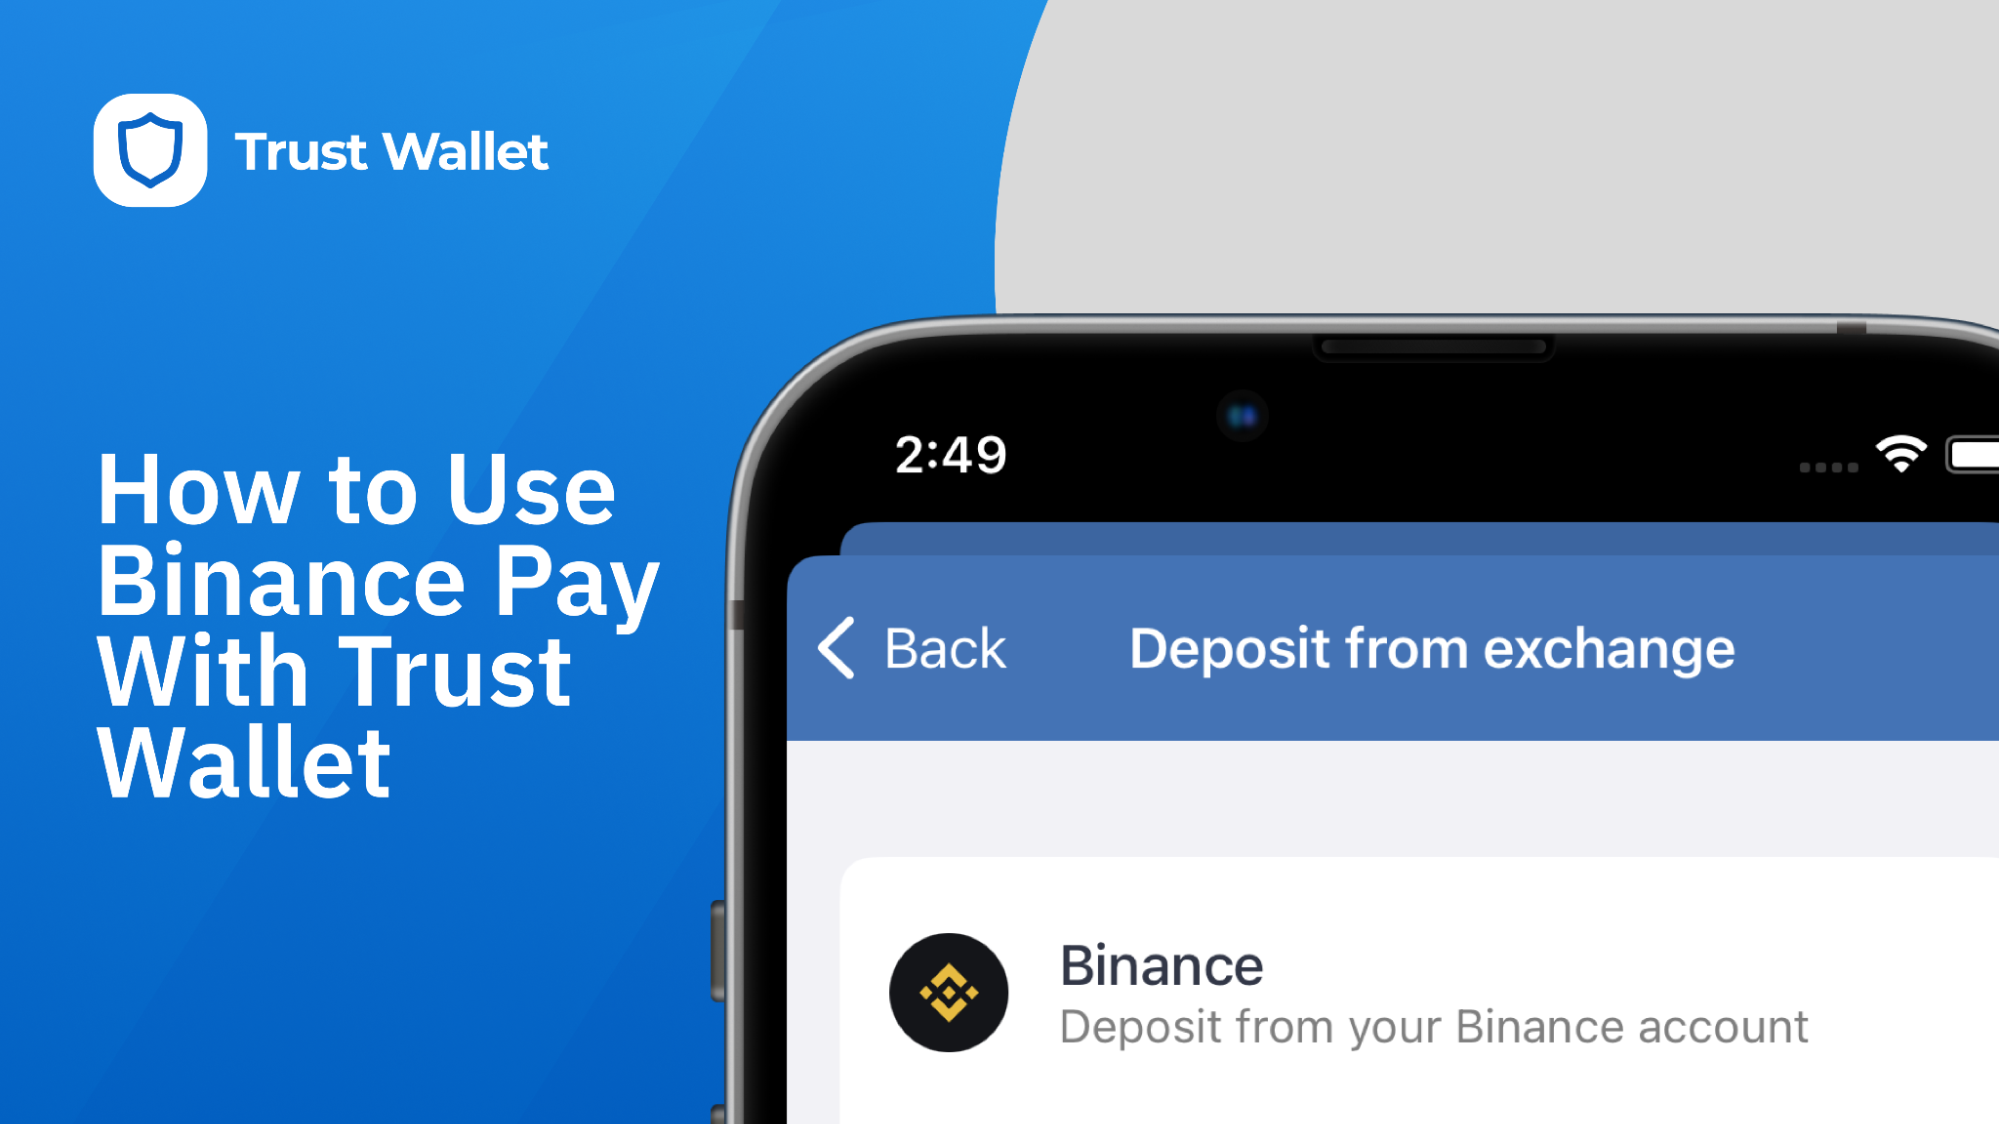 How to Use Binance Pay with Trust Wallet